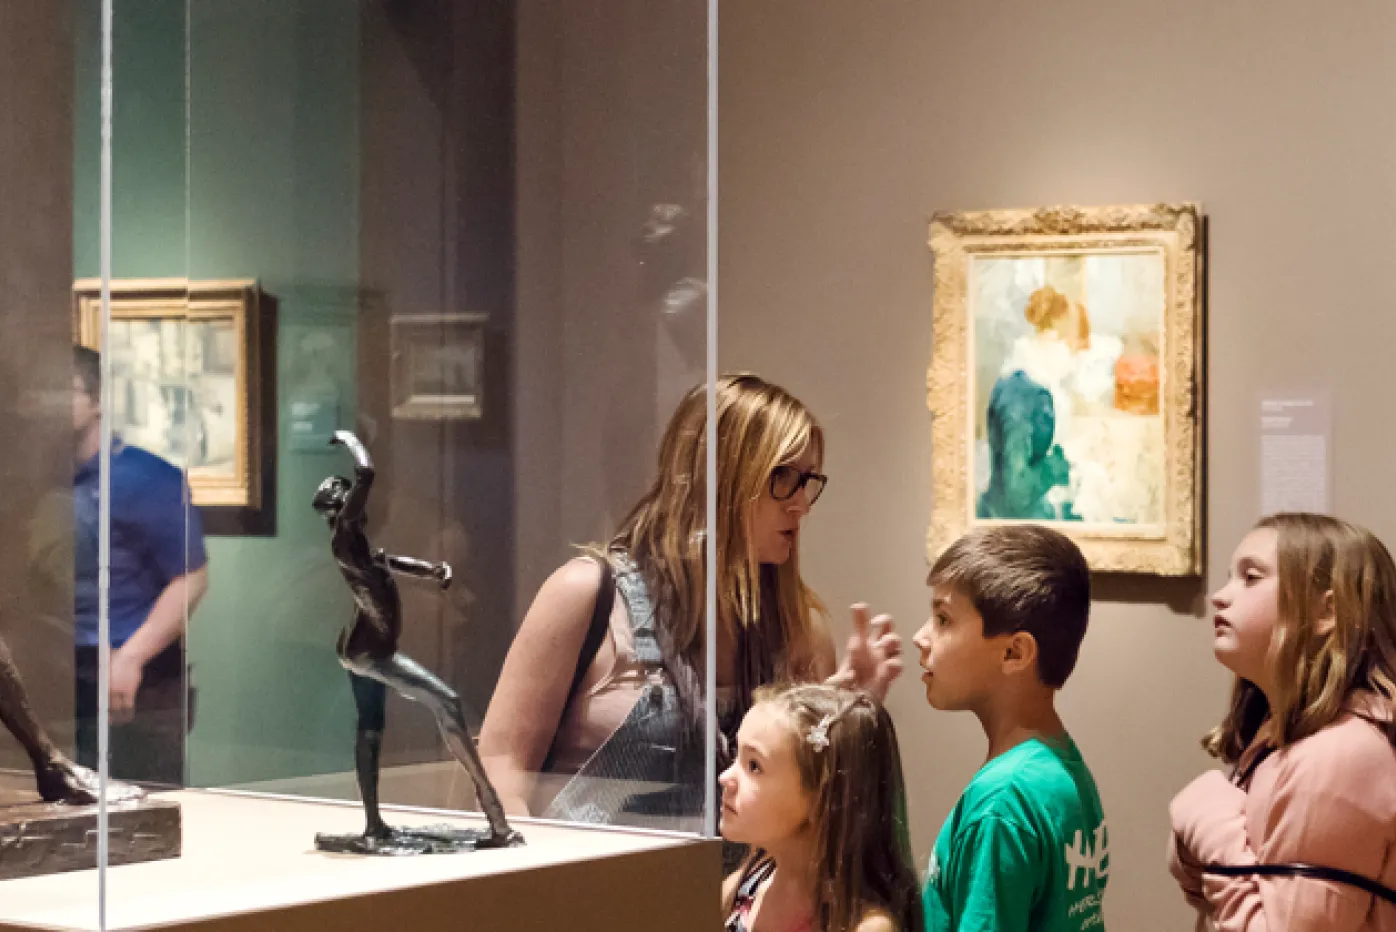 A family viewing a Degas sculpture in Humble and Human: Impressionist Era Treasures